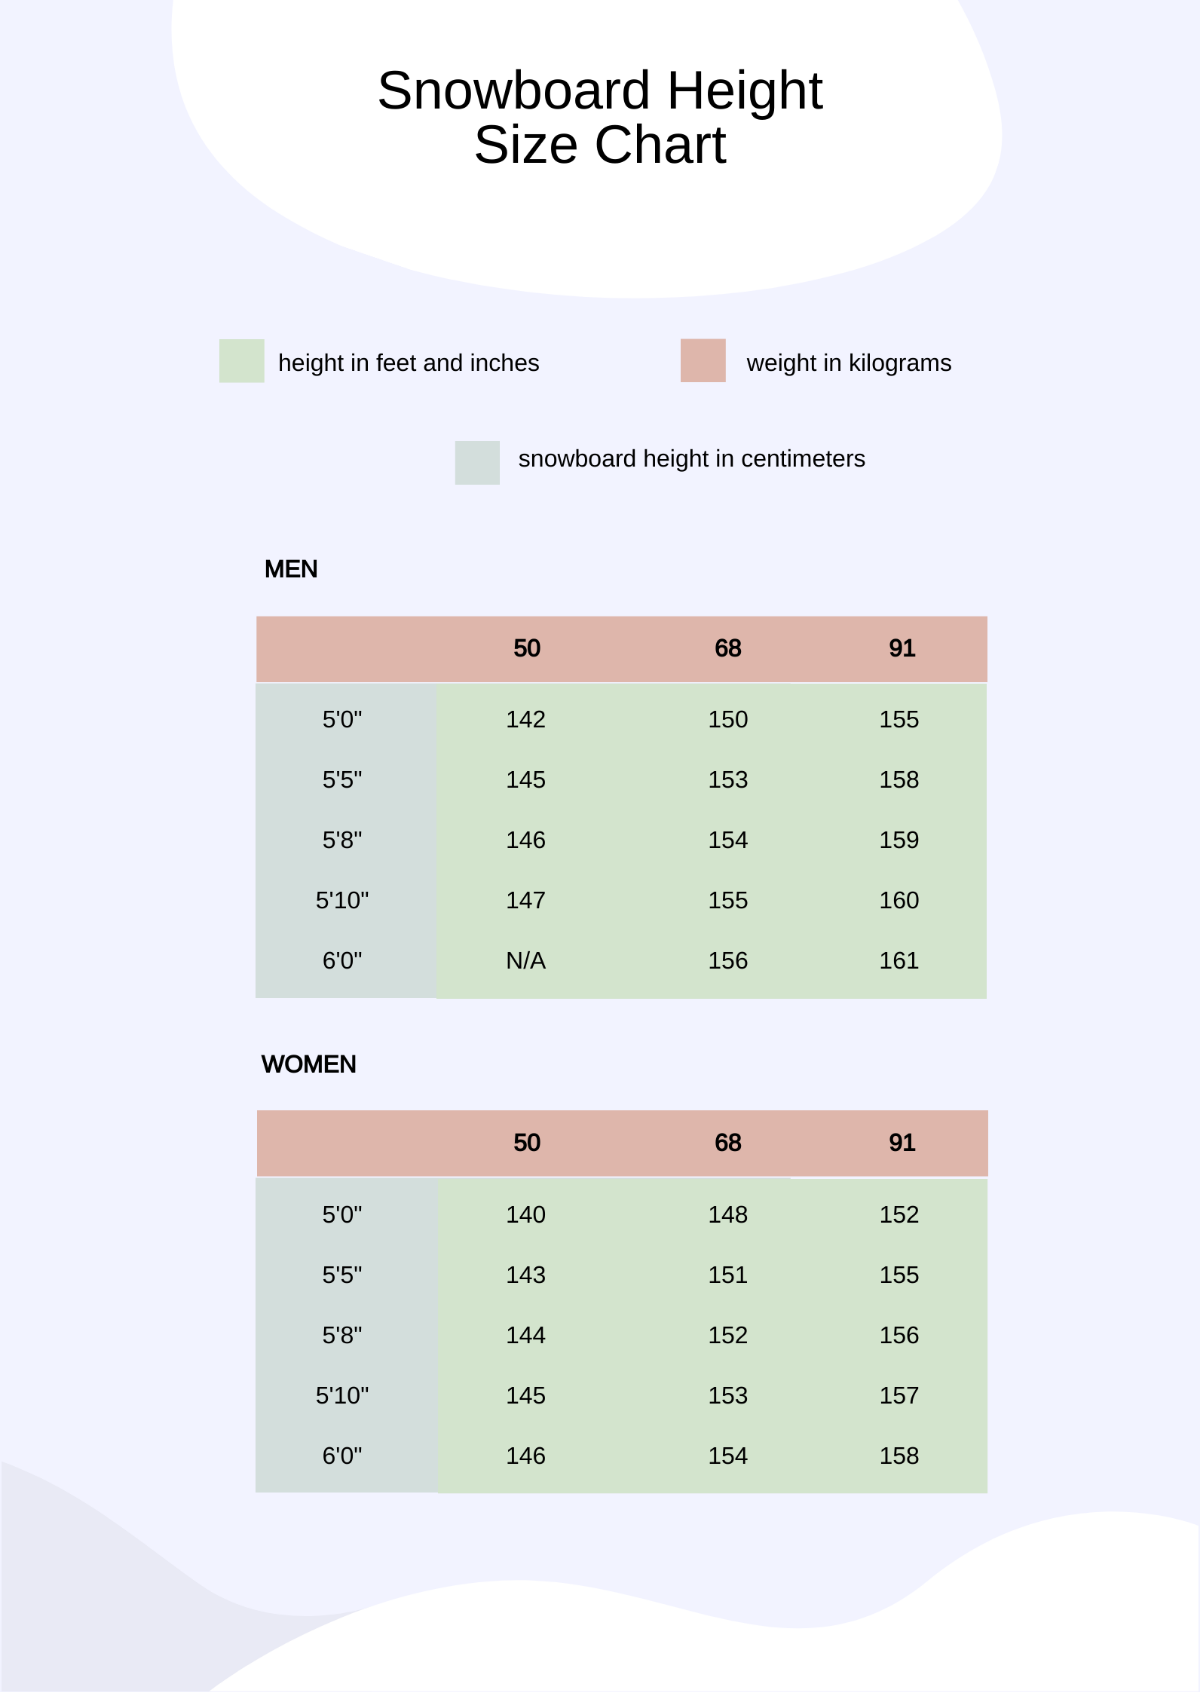 Snowboard Height Size Chart Template